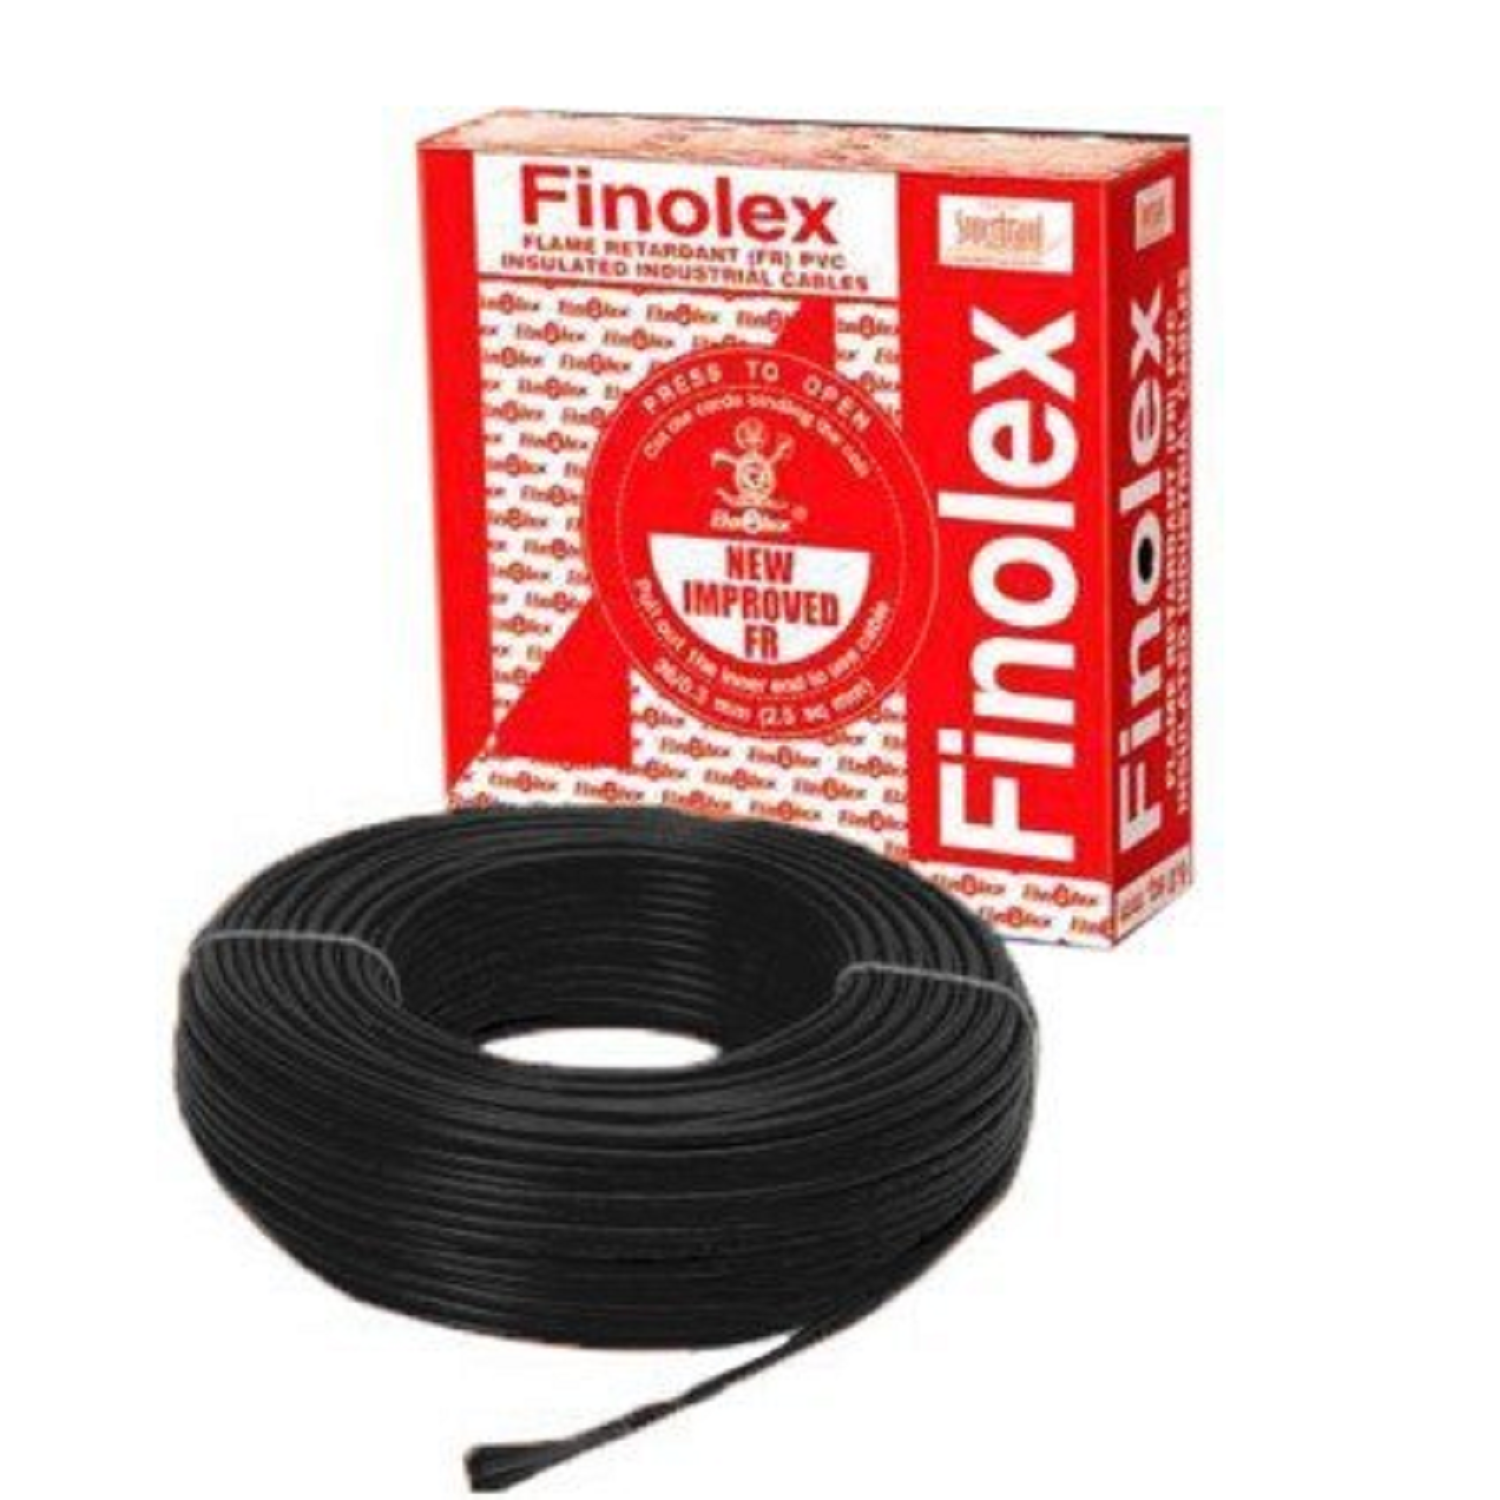 2.5 Sqmm Finolex FR Single Core Copper Wire (90 Mtr) With PVC Insulated for House 38 Industrial Uses